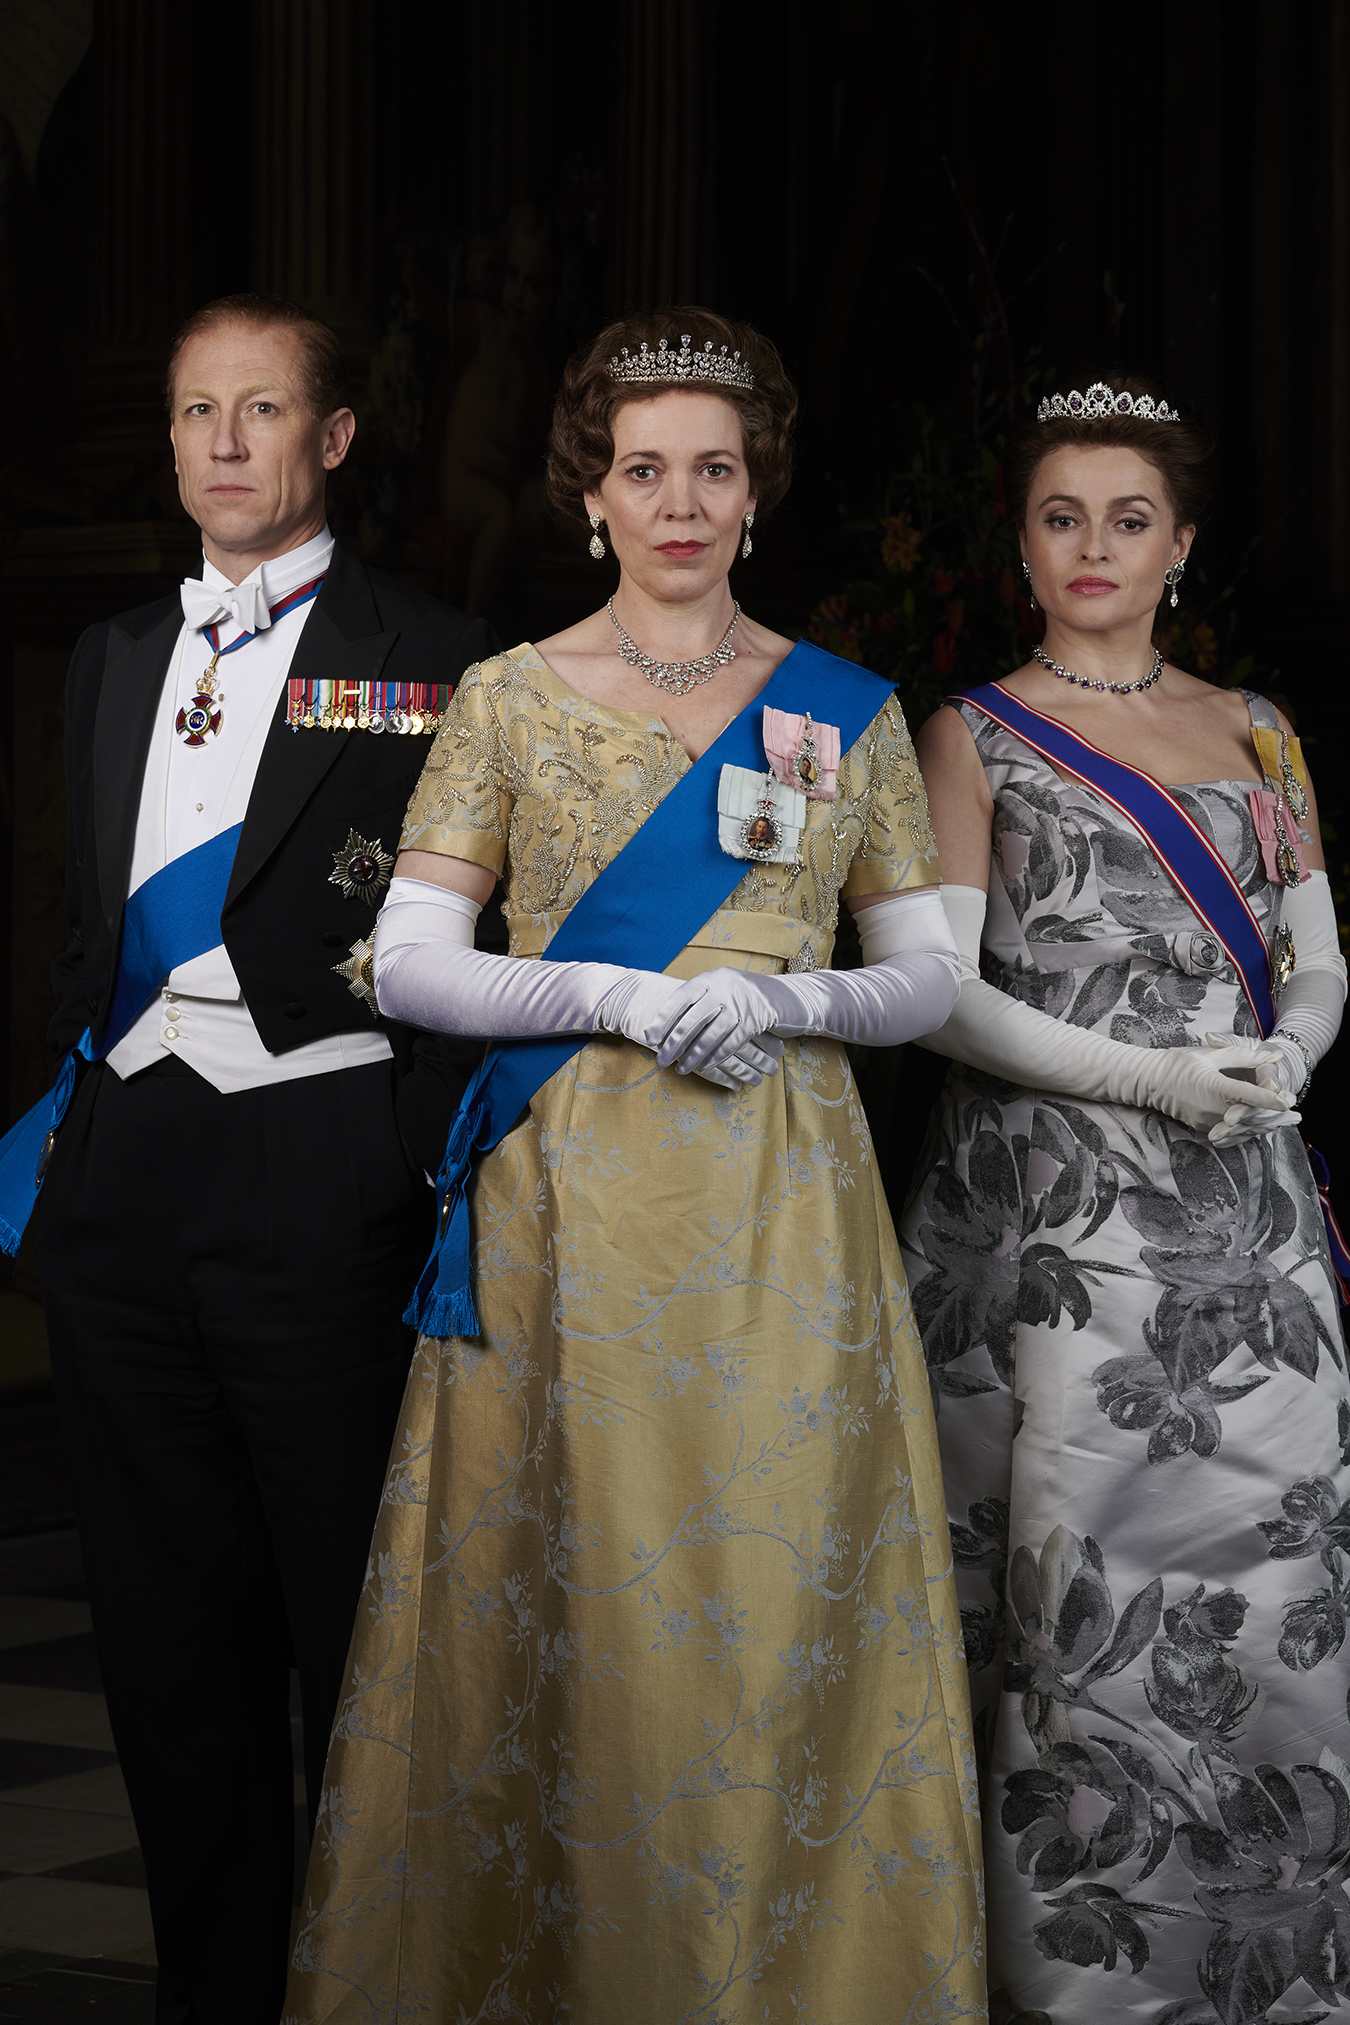 The Crown Cast Previews The Changing Of The Guard For Season 3